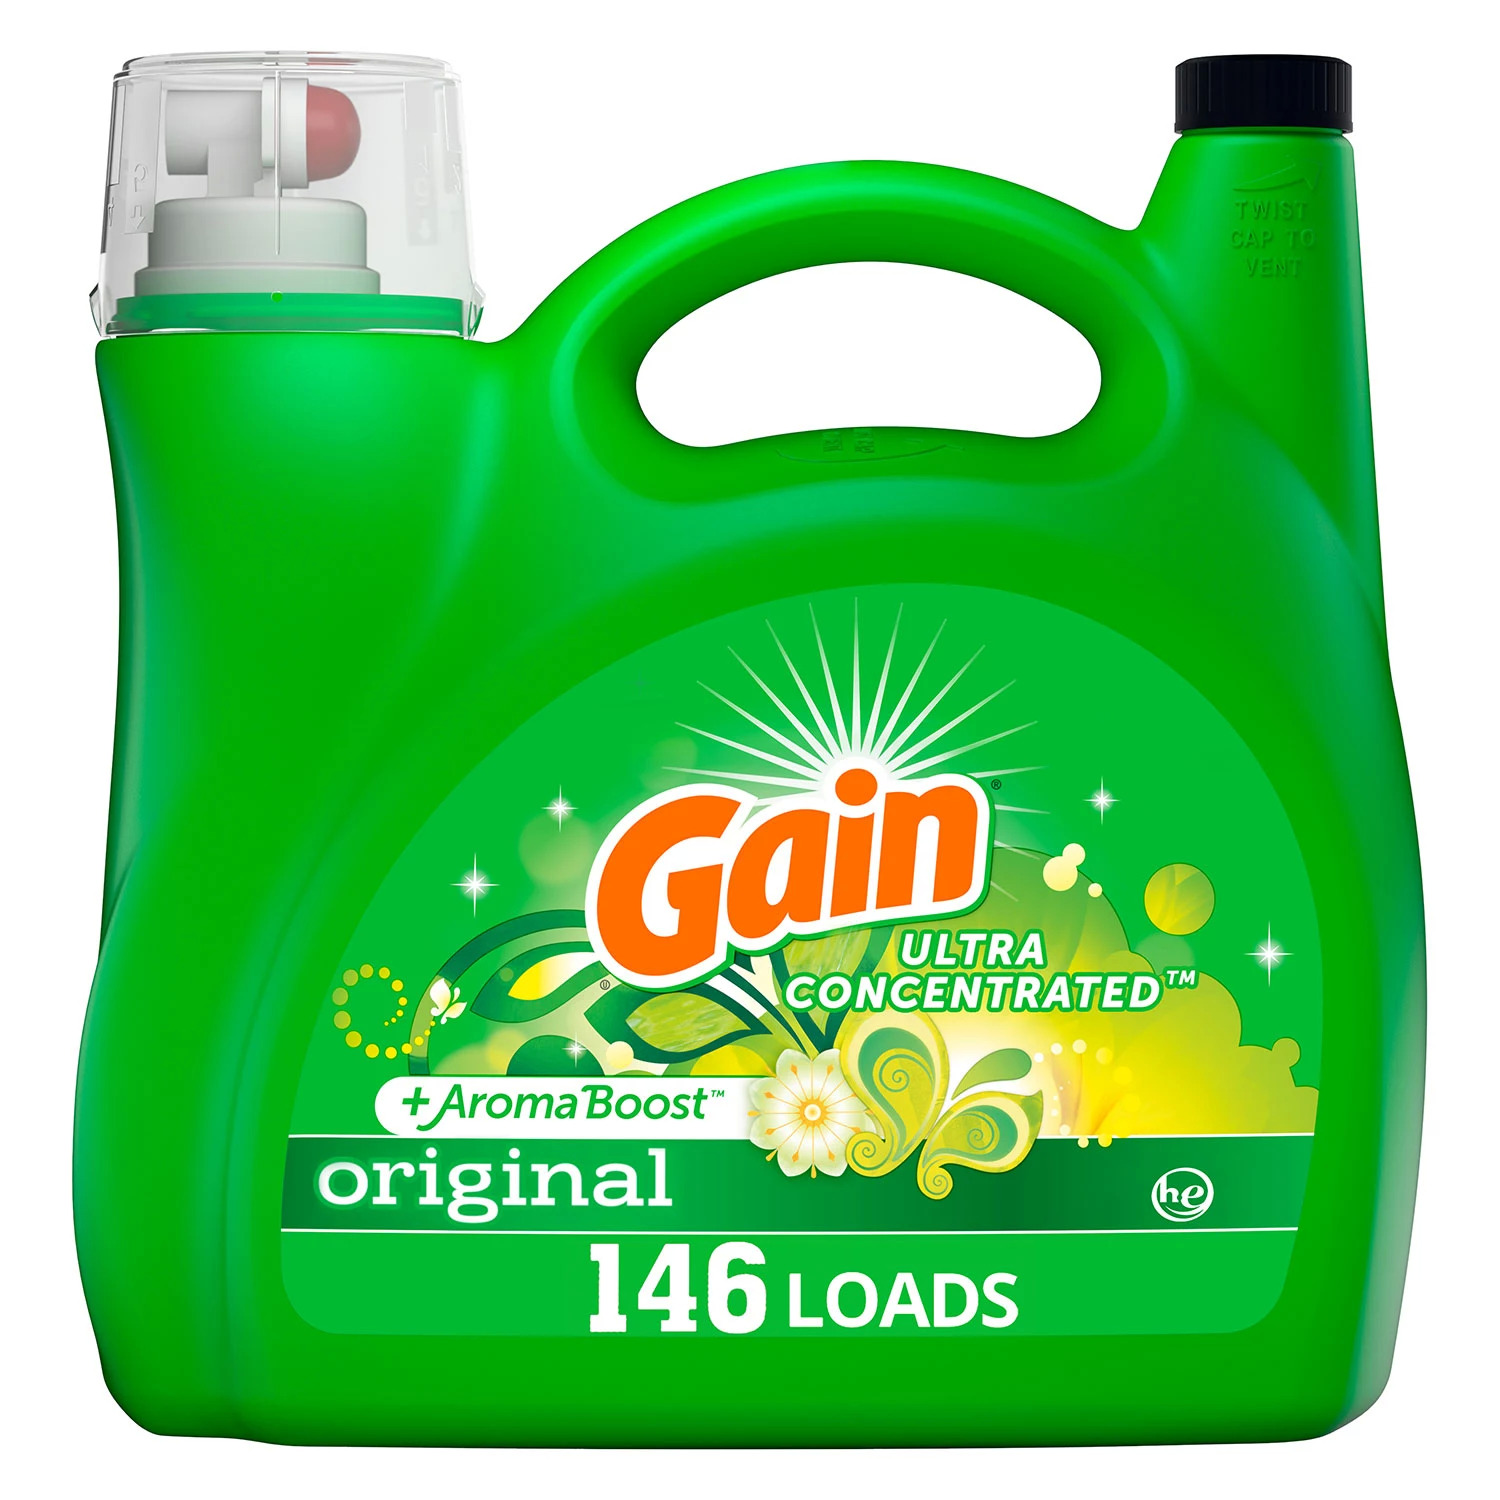 Sam's Club Members: Members: 200-Oz Gain Ultra Concentrated + Aroma Boost Liquid Laundry Detergent (Original) $15.45 + Free Store Pickup